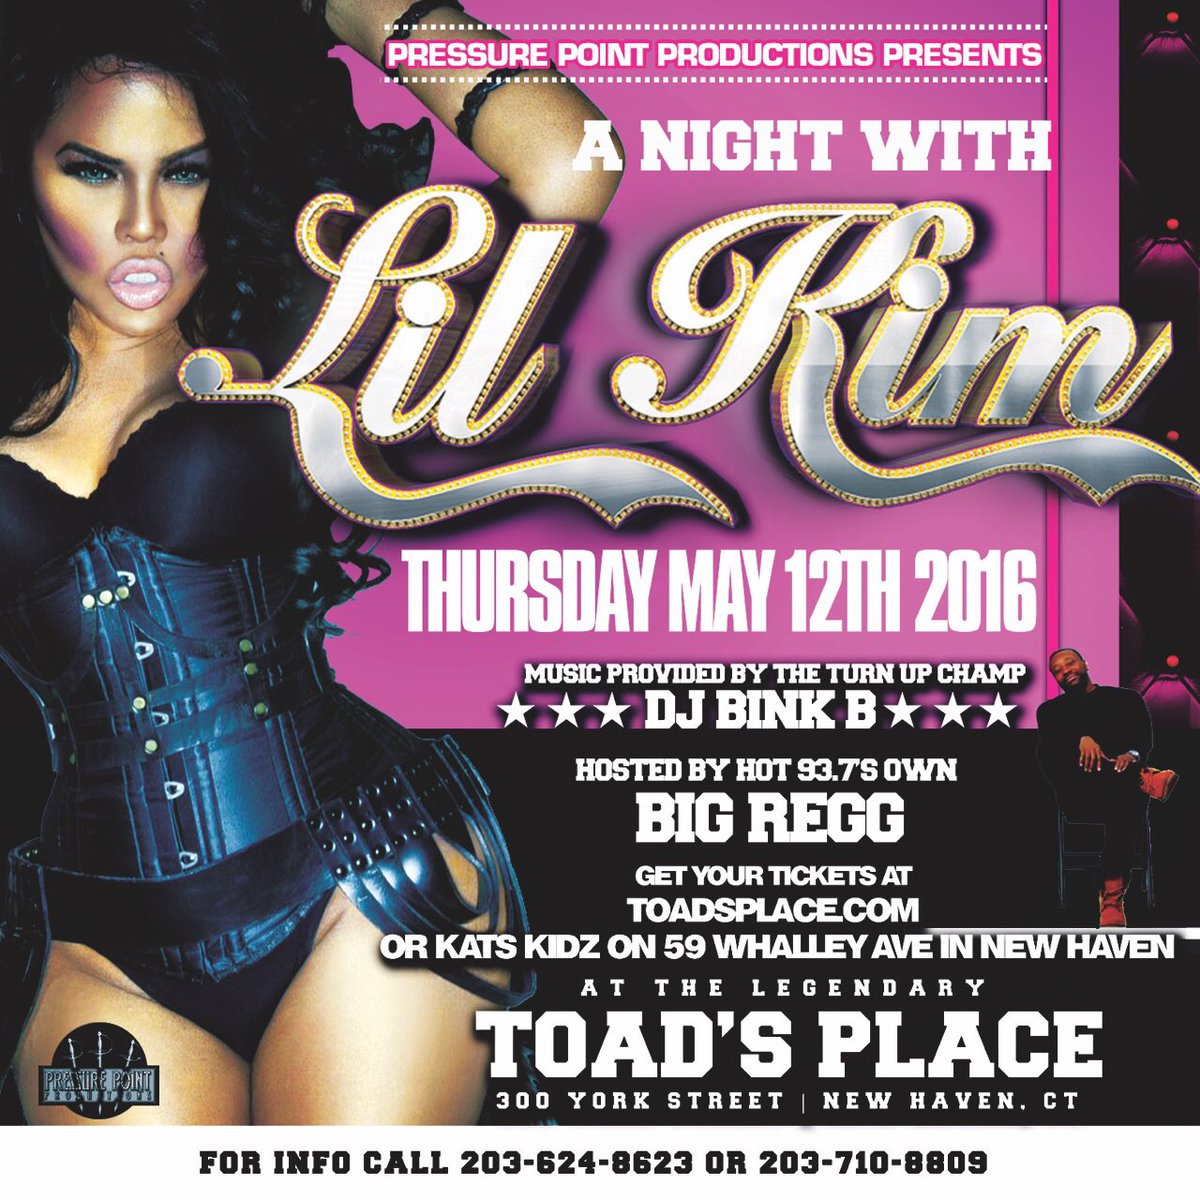 Connecticut Get Ready !!!!!!! #Toadsplace in new haven This Thursday #May12 !! https://t.co/u0haSXlxy4 https://t.co/CKODMRKiiR